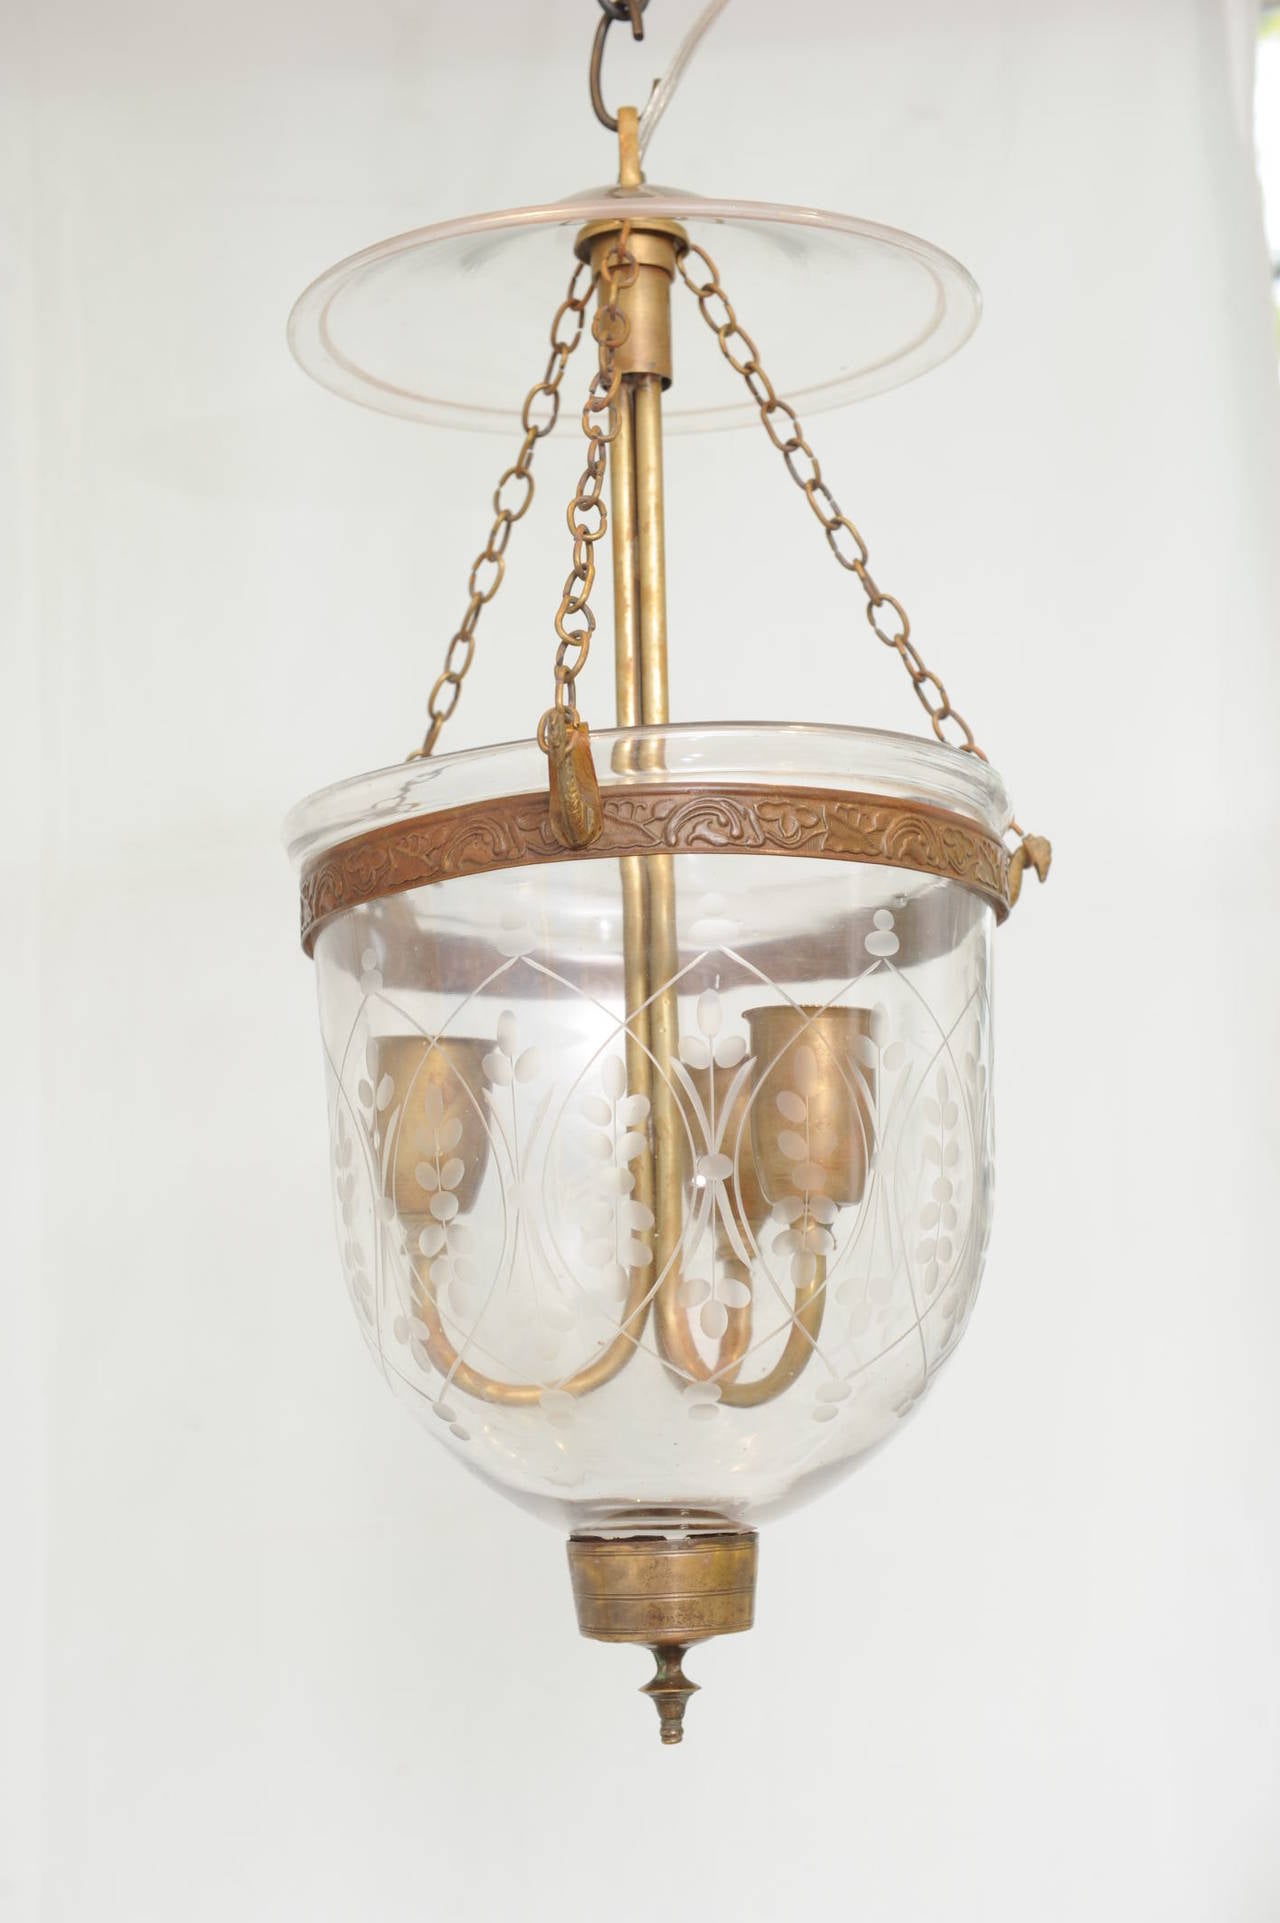 Pair of elegant, handblown bell jar hall lanterns with sheaves of wheat etching. Late 19th century, English with original brass hardware. Wired for American use without altering its integrity. Takes three candelabra bulbs.